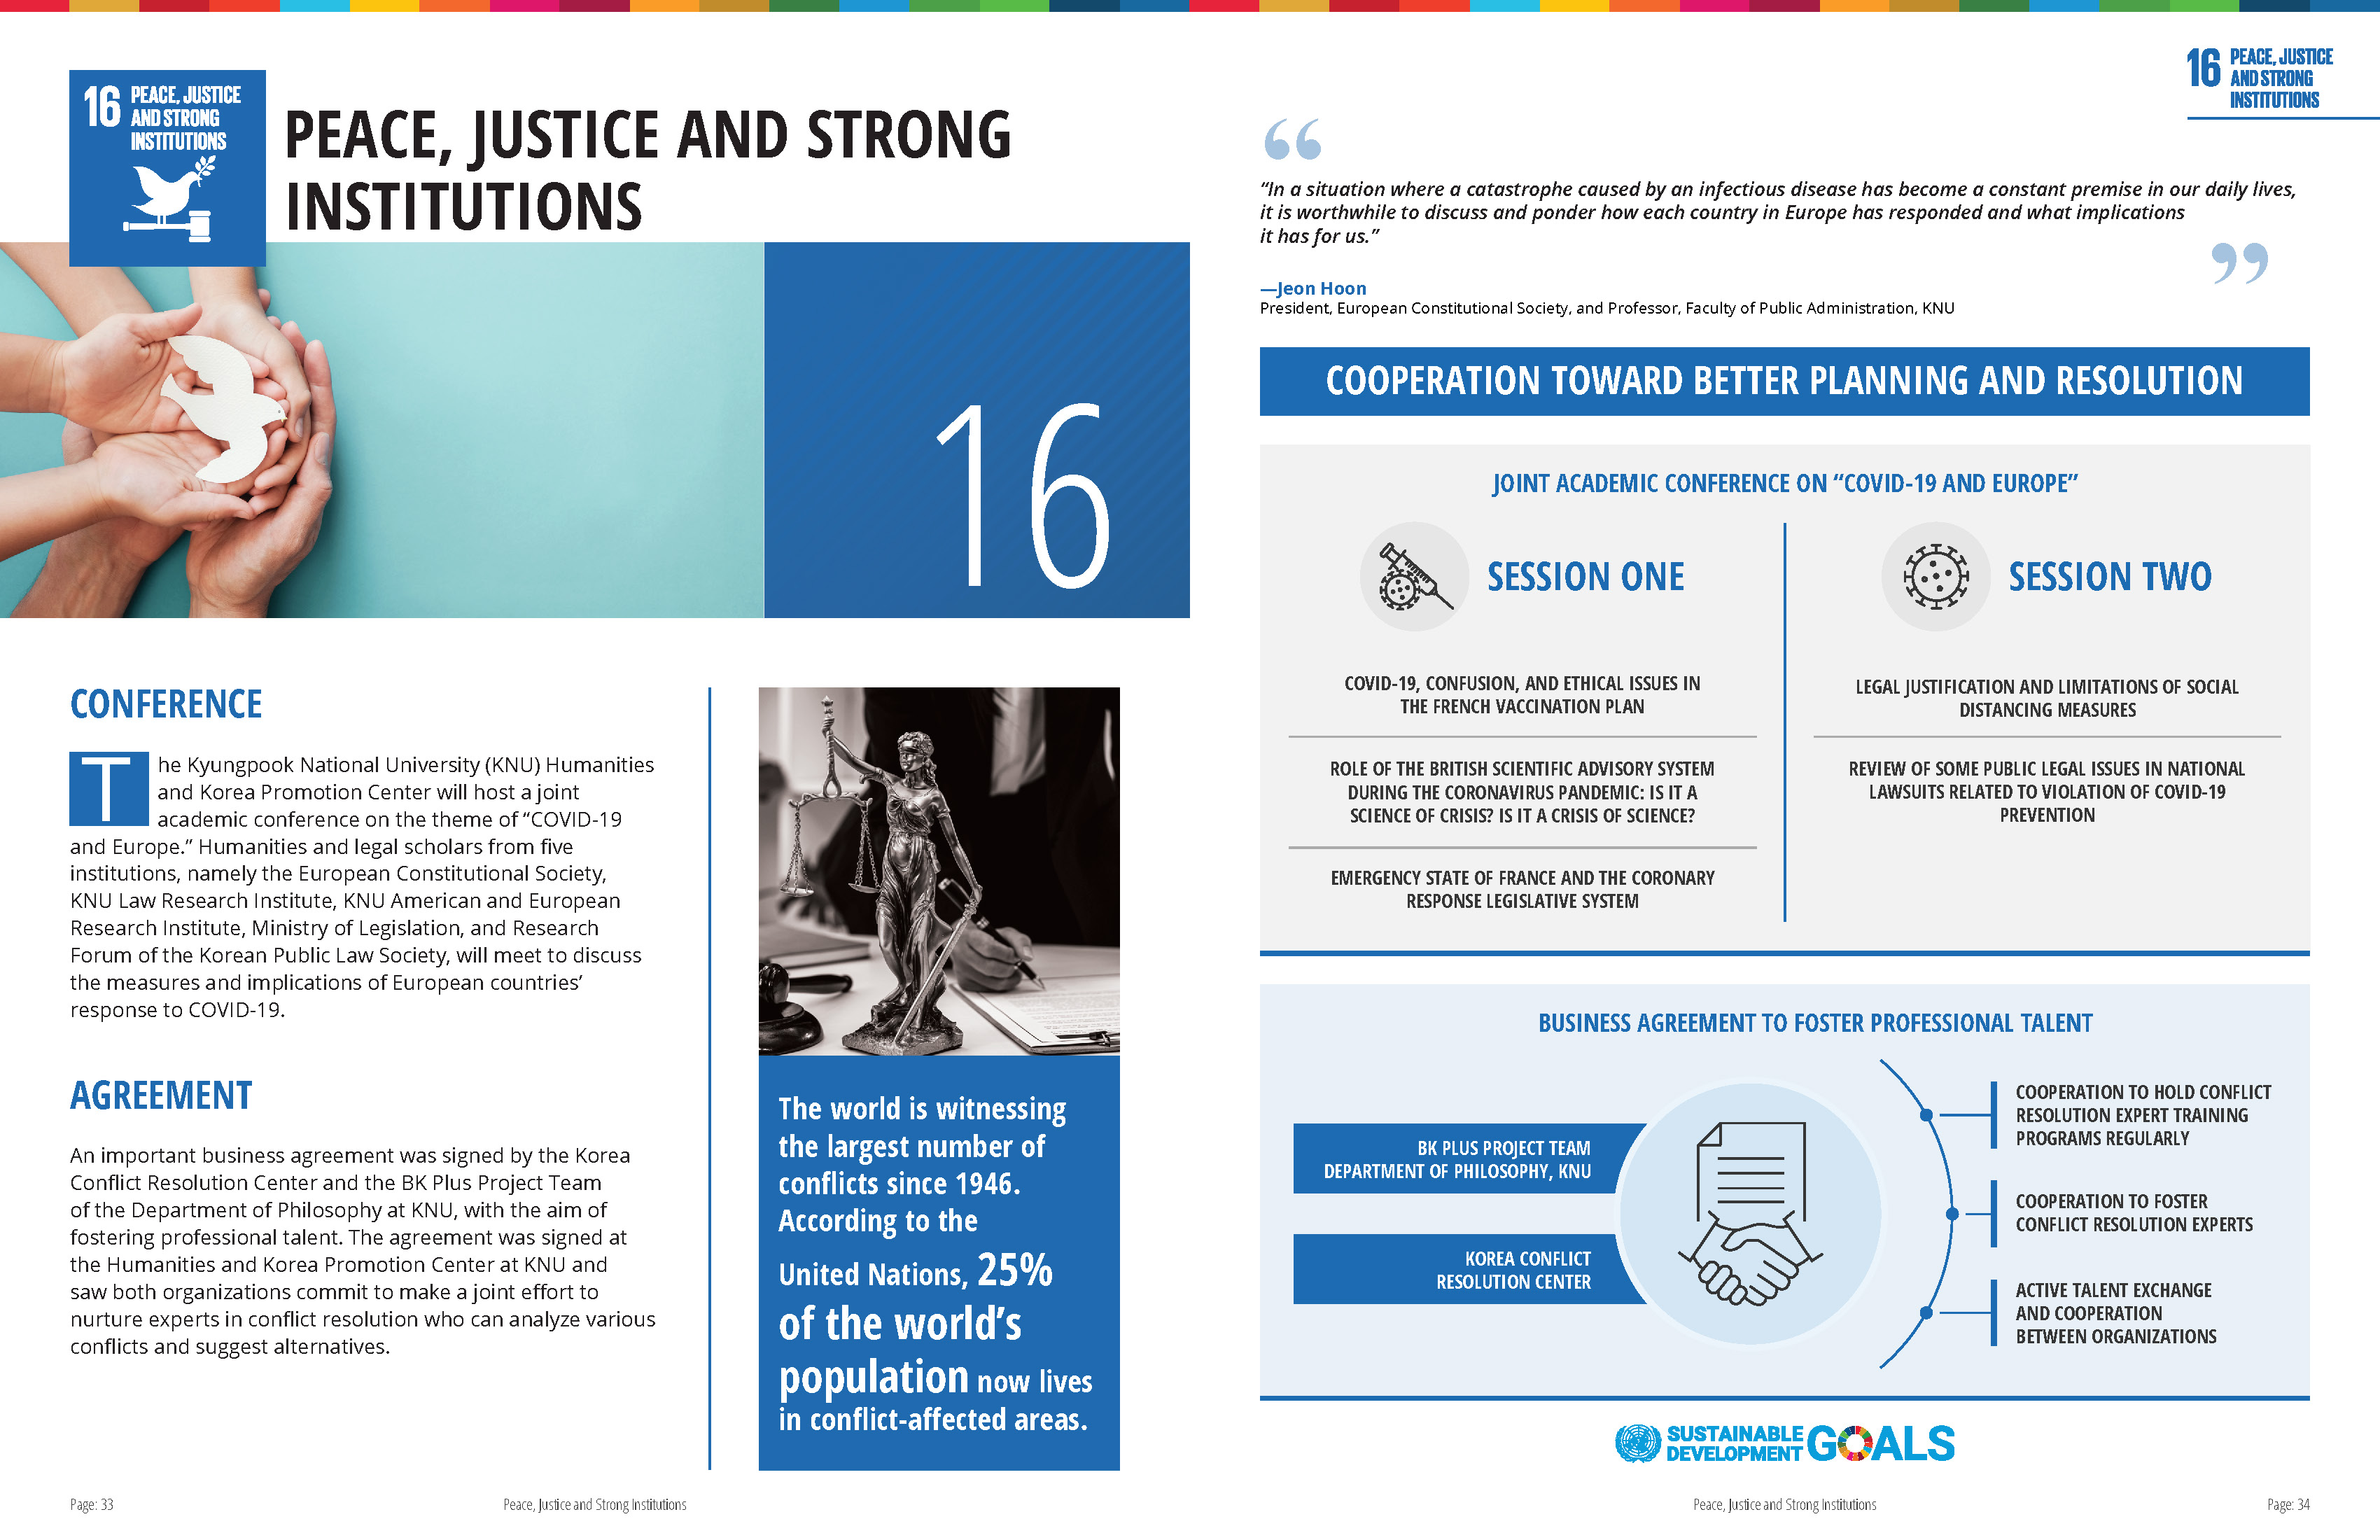 [SDG6 Peace, Justice and Strong Institutions] 2021-2022 Kyungpook National University SDG Report 관련 이미지입니다.